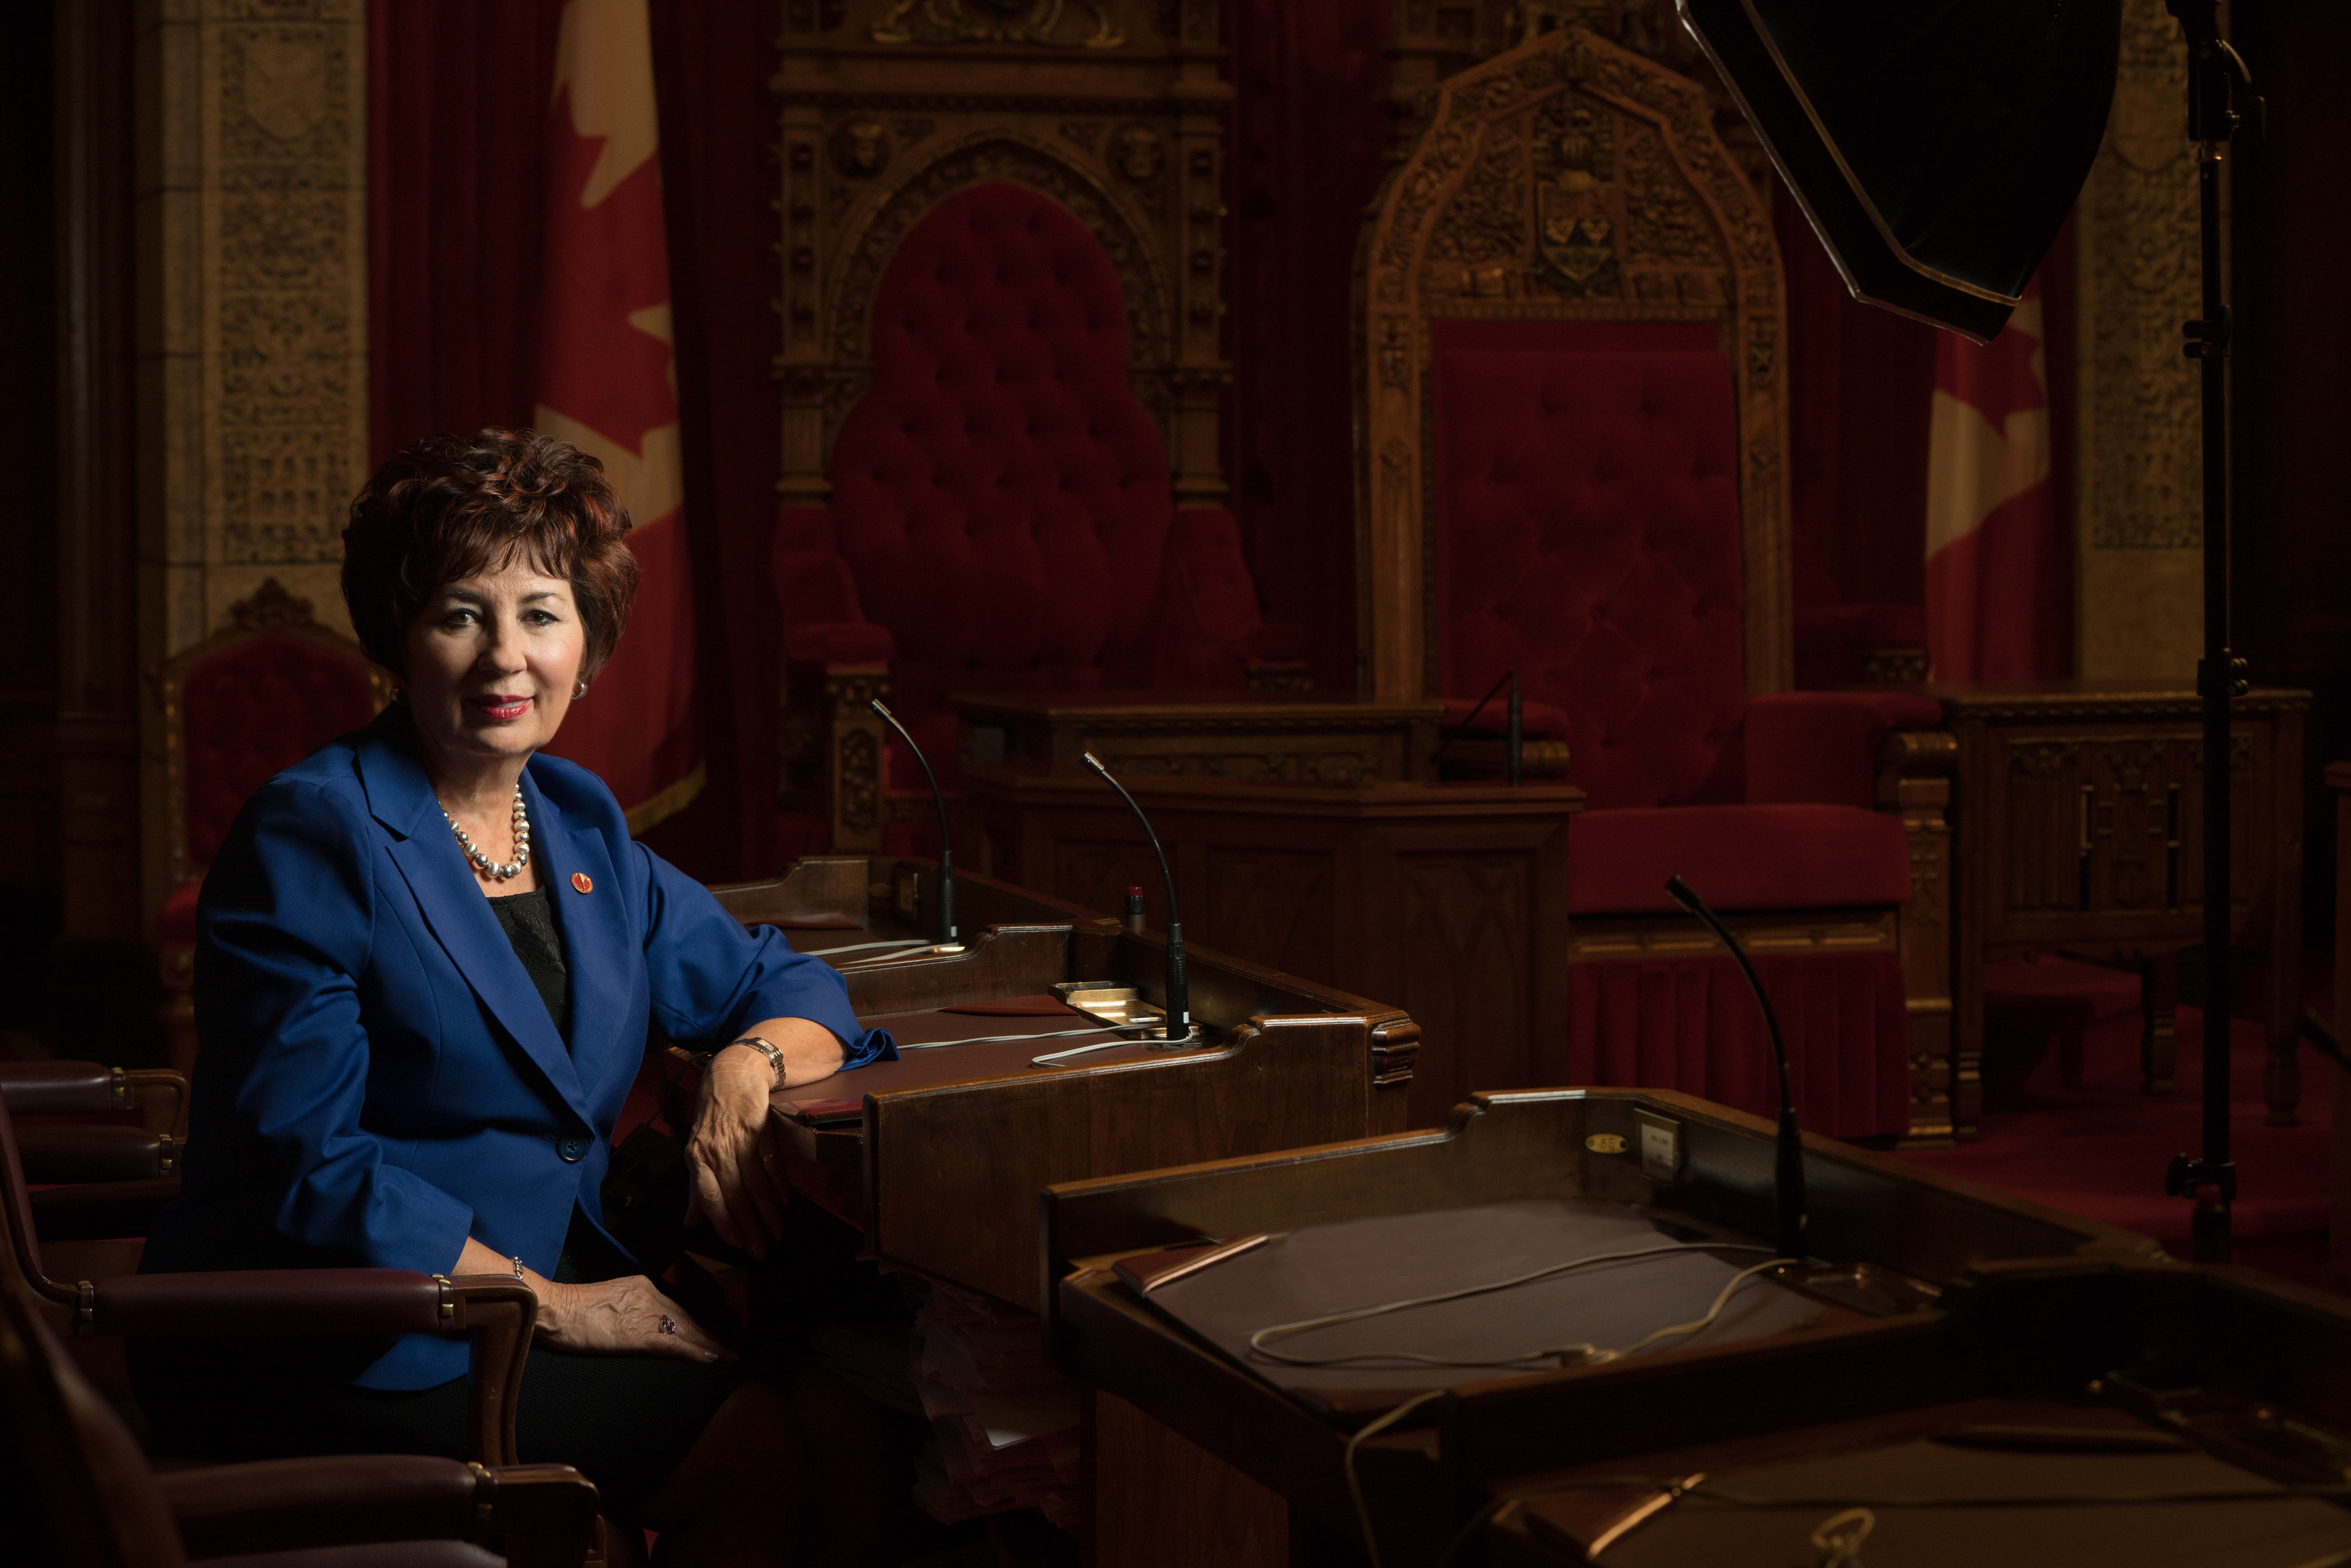 Senator Tardif retires this month from the Senate of Canada after 13 years of service.